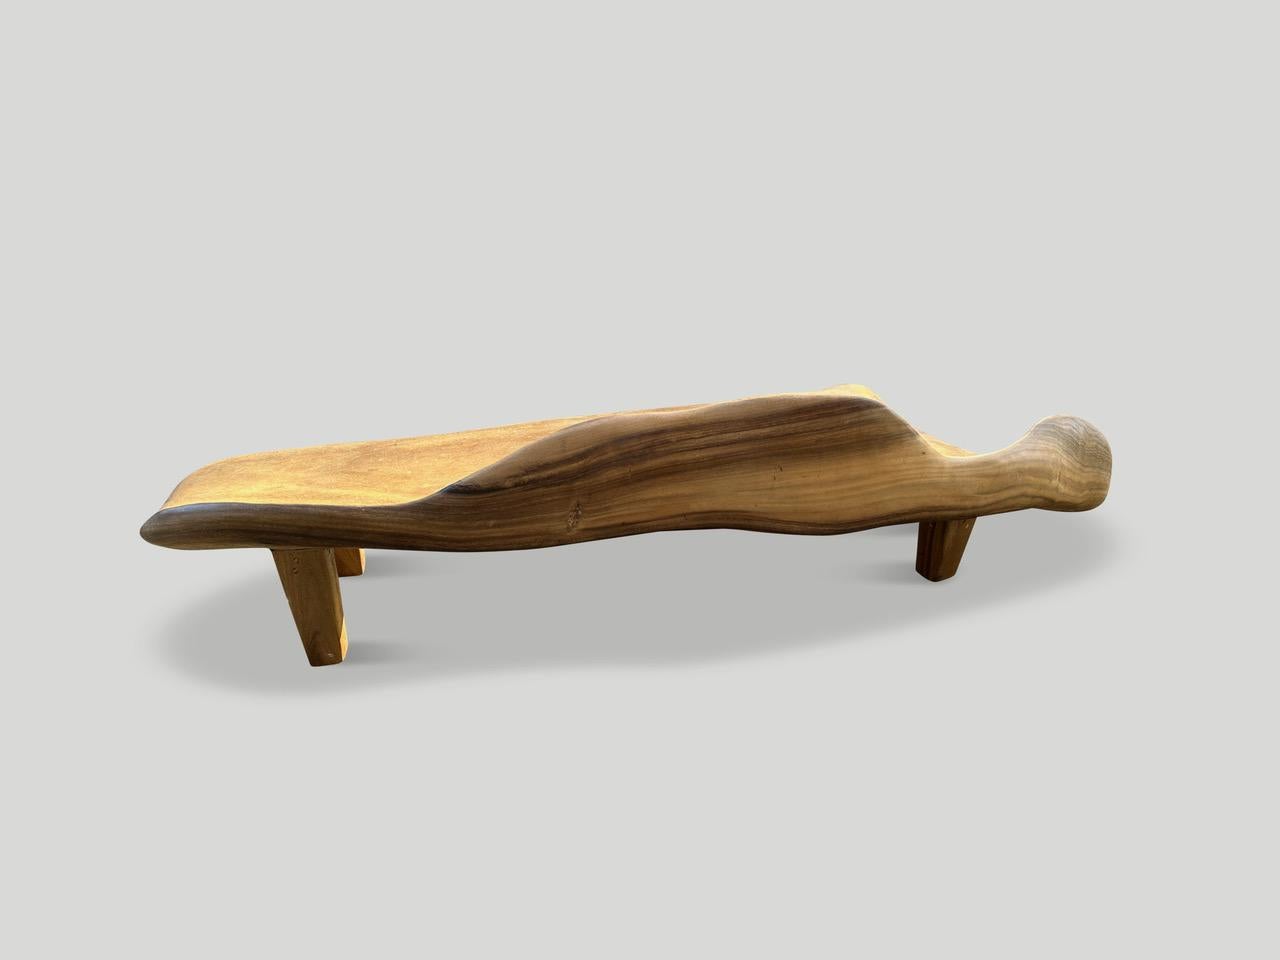 Andrianna Shamaris Impressive Sculptural Suar Wood Bench  In Excellent Condition For Sale In New York, NY